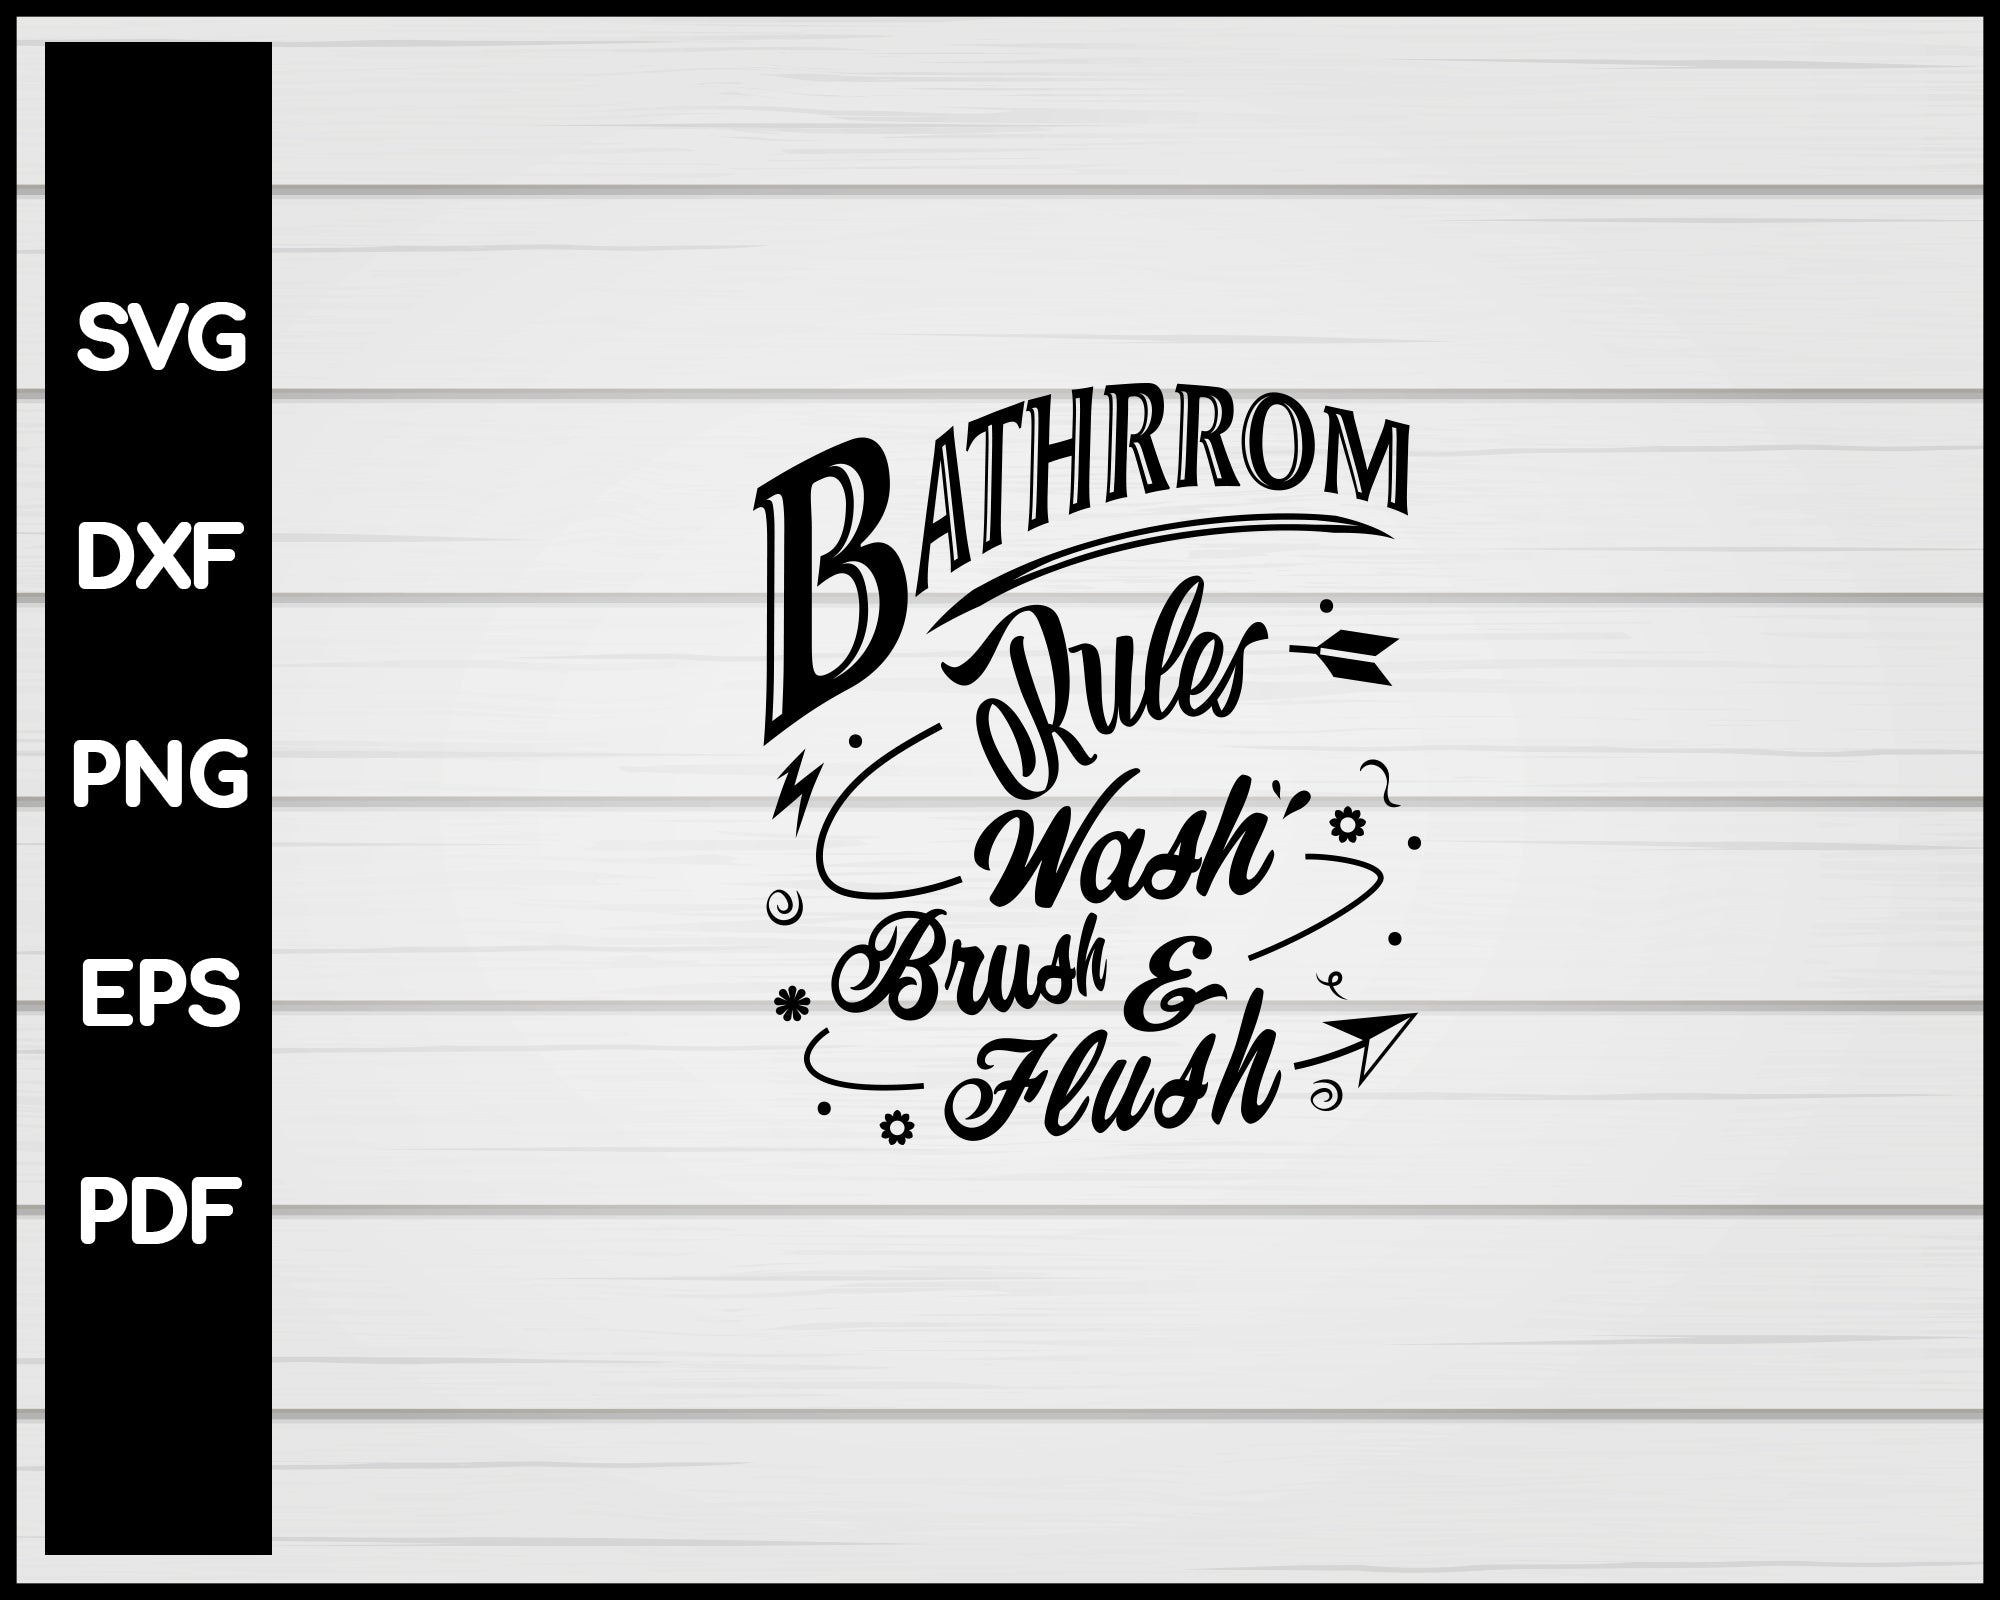 Bathroom Rules Wash Brush Flush svg Cut File For Cricut Silhouette eps png dxf Printable Files